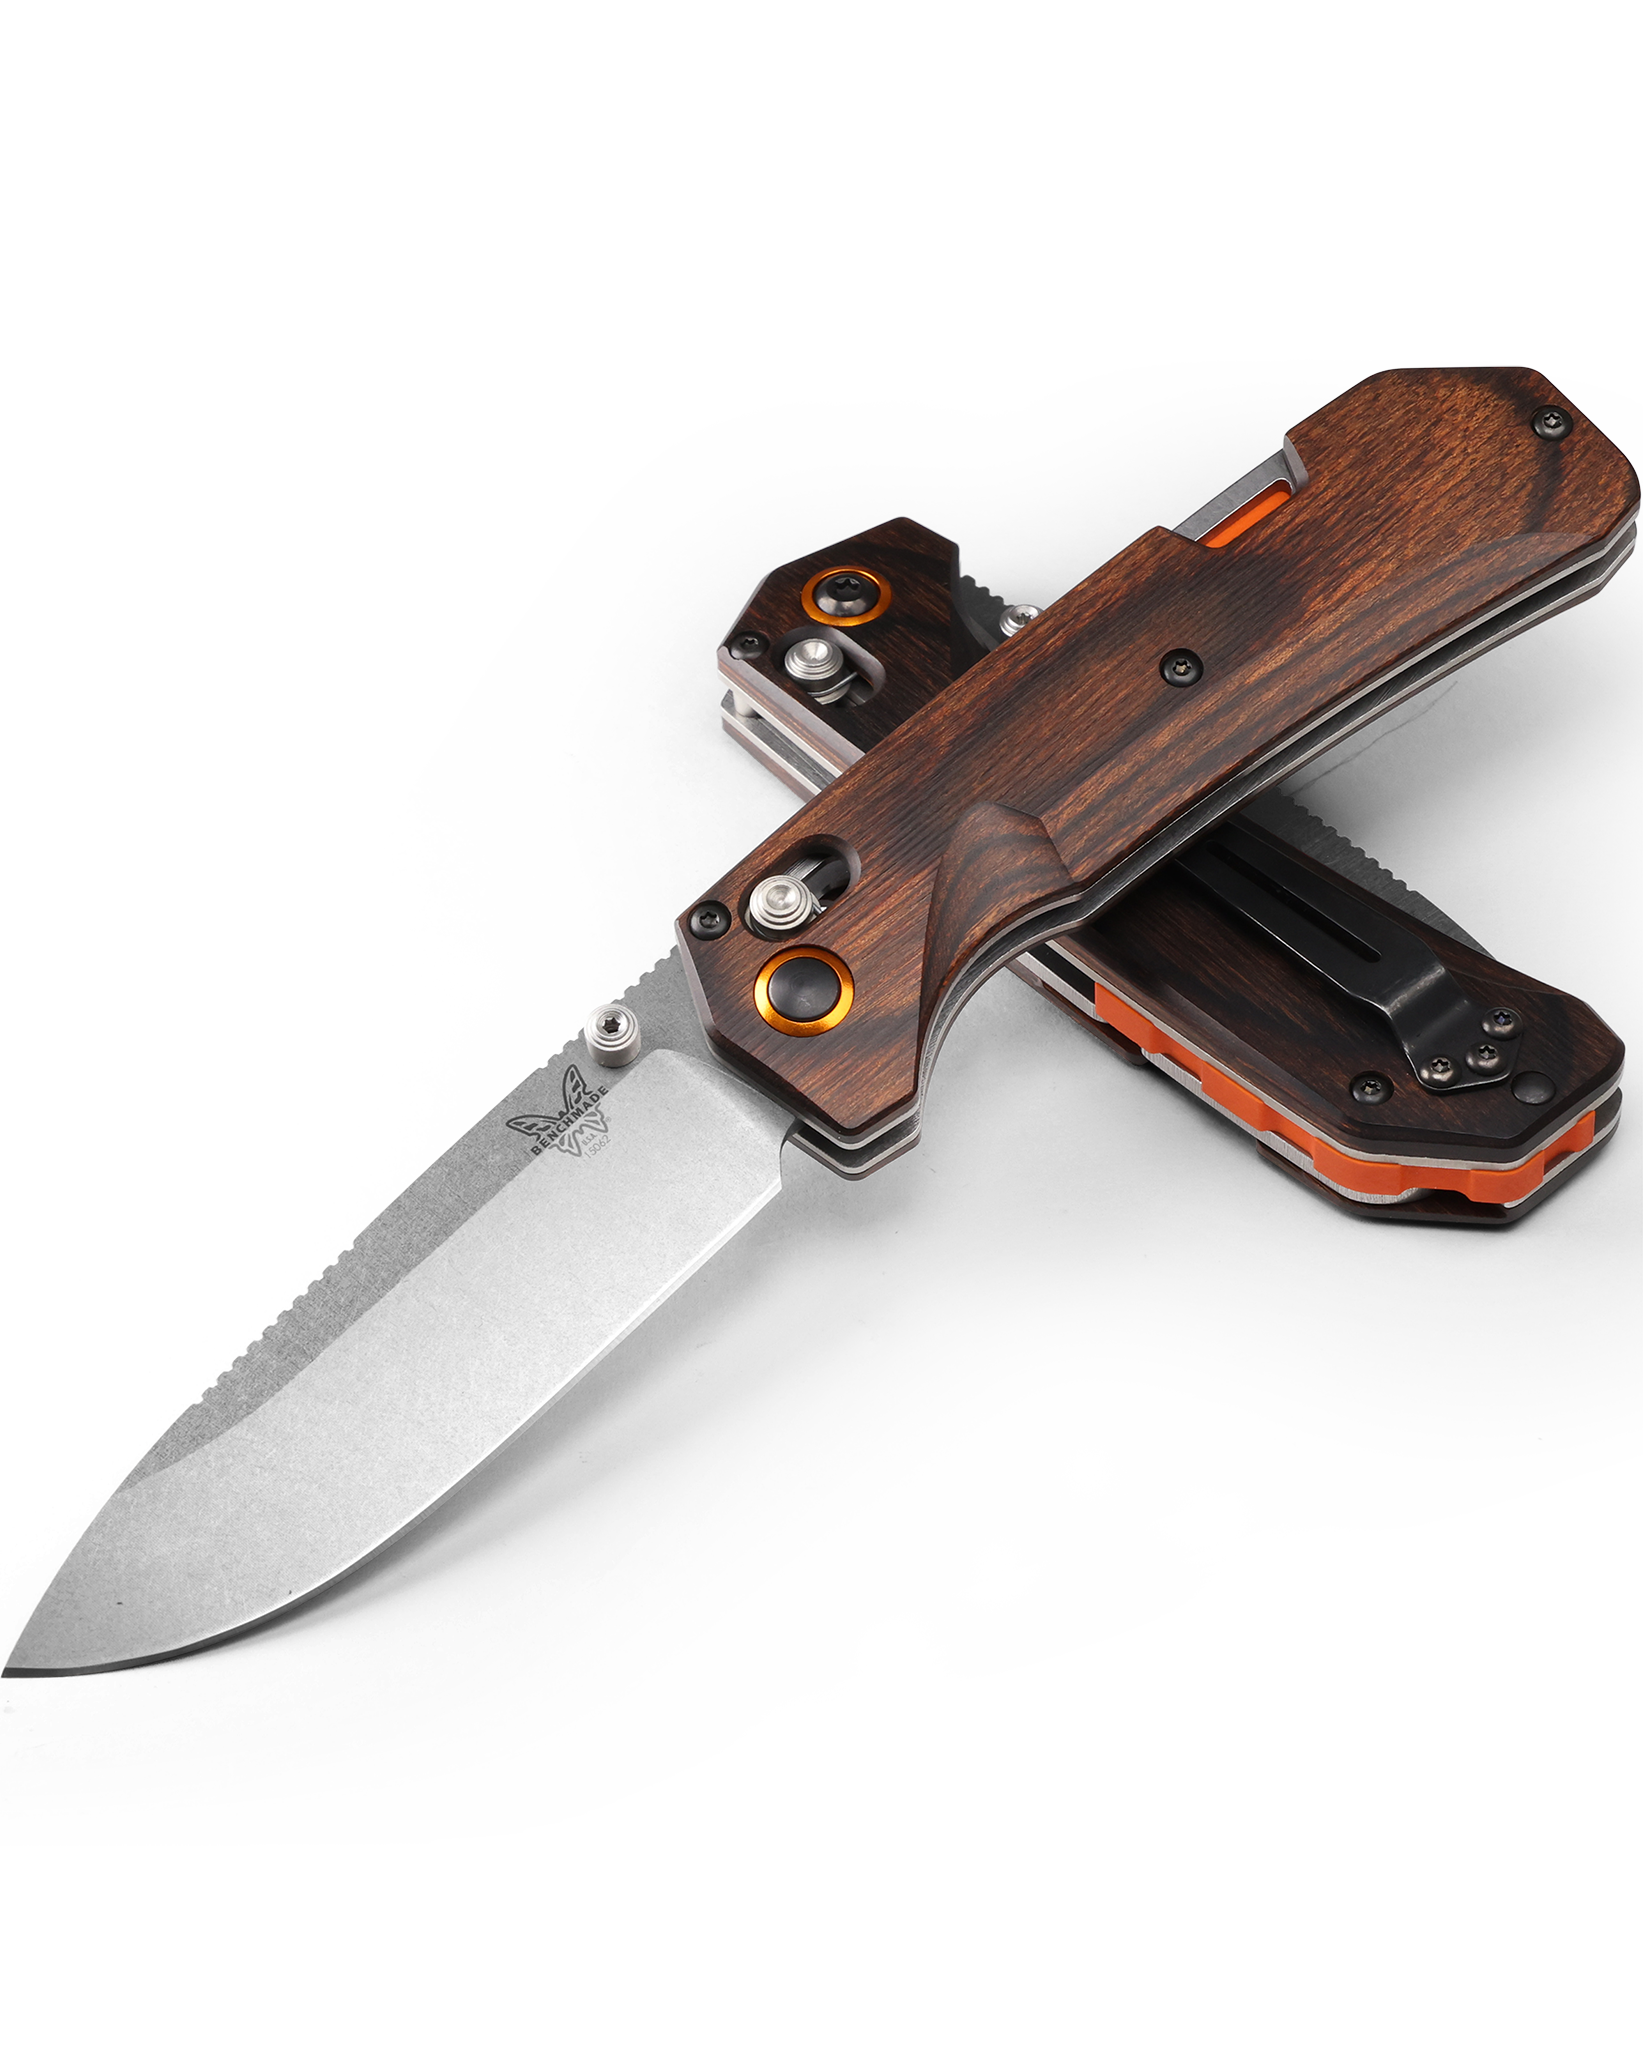 Benchmade Grizzly Creek - Wood Handle - AXIS Lock w/ Gut Hook - 15062